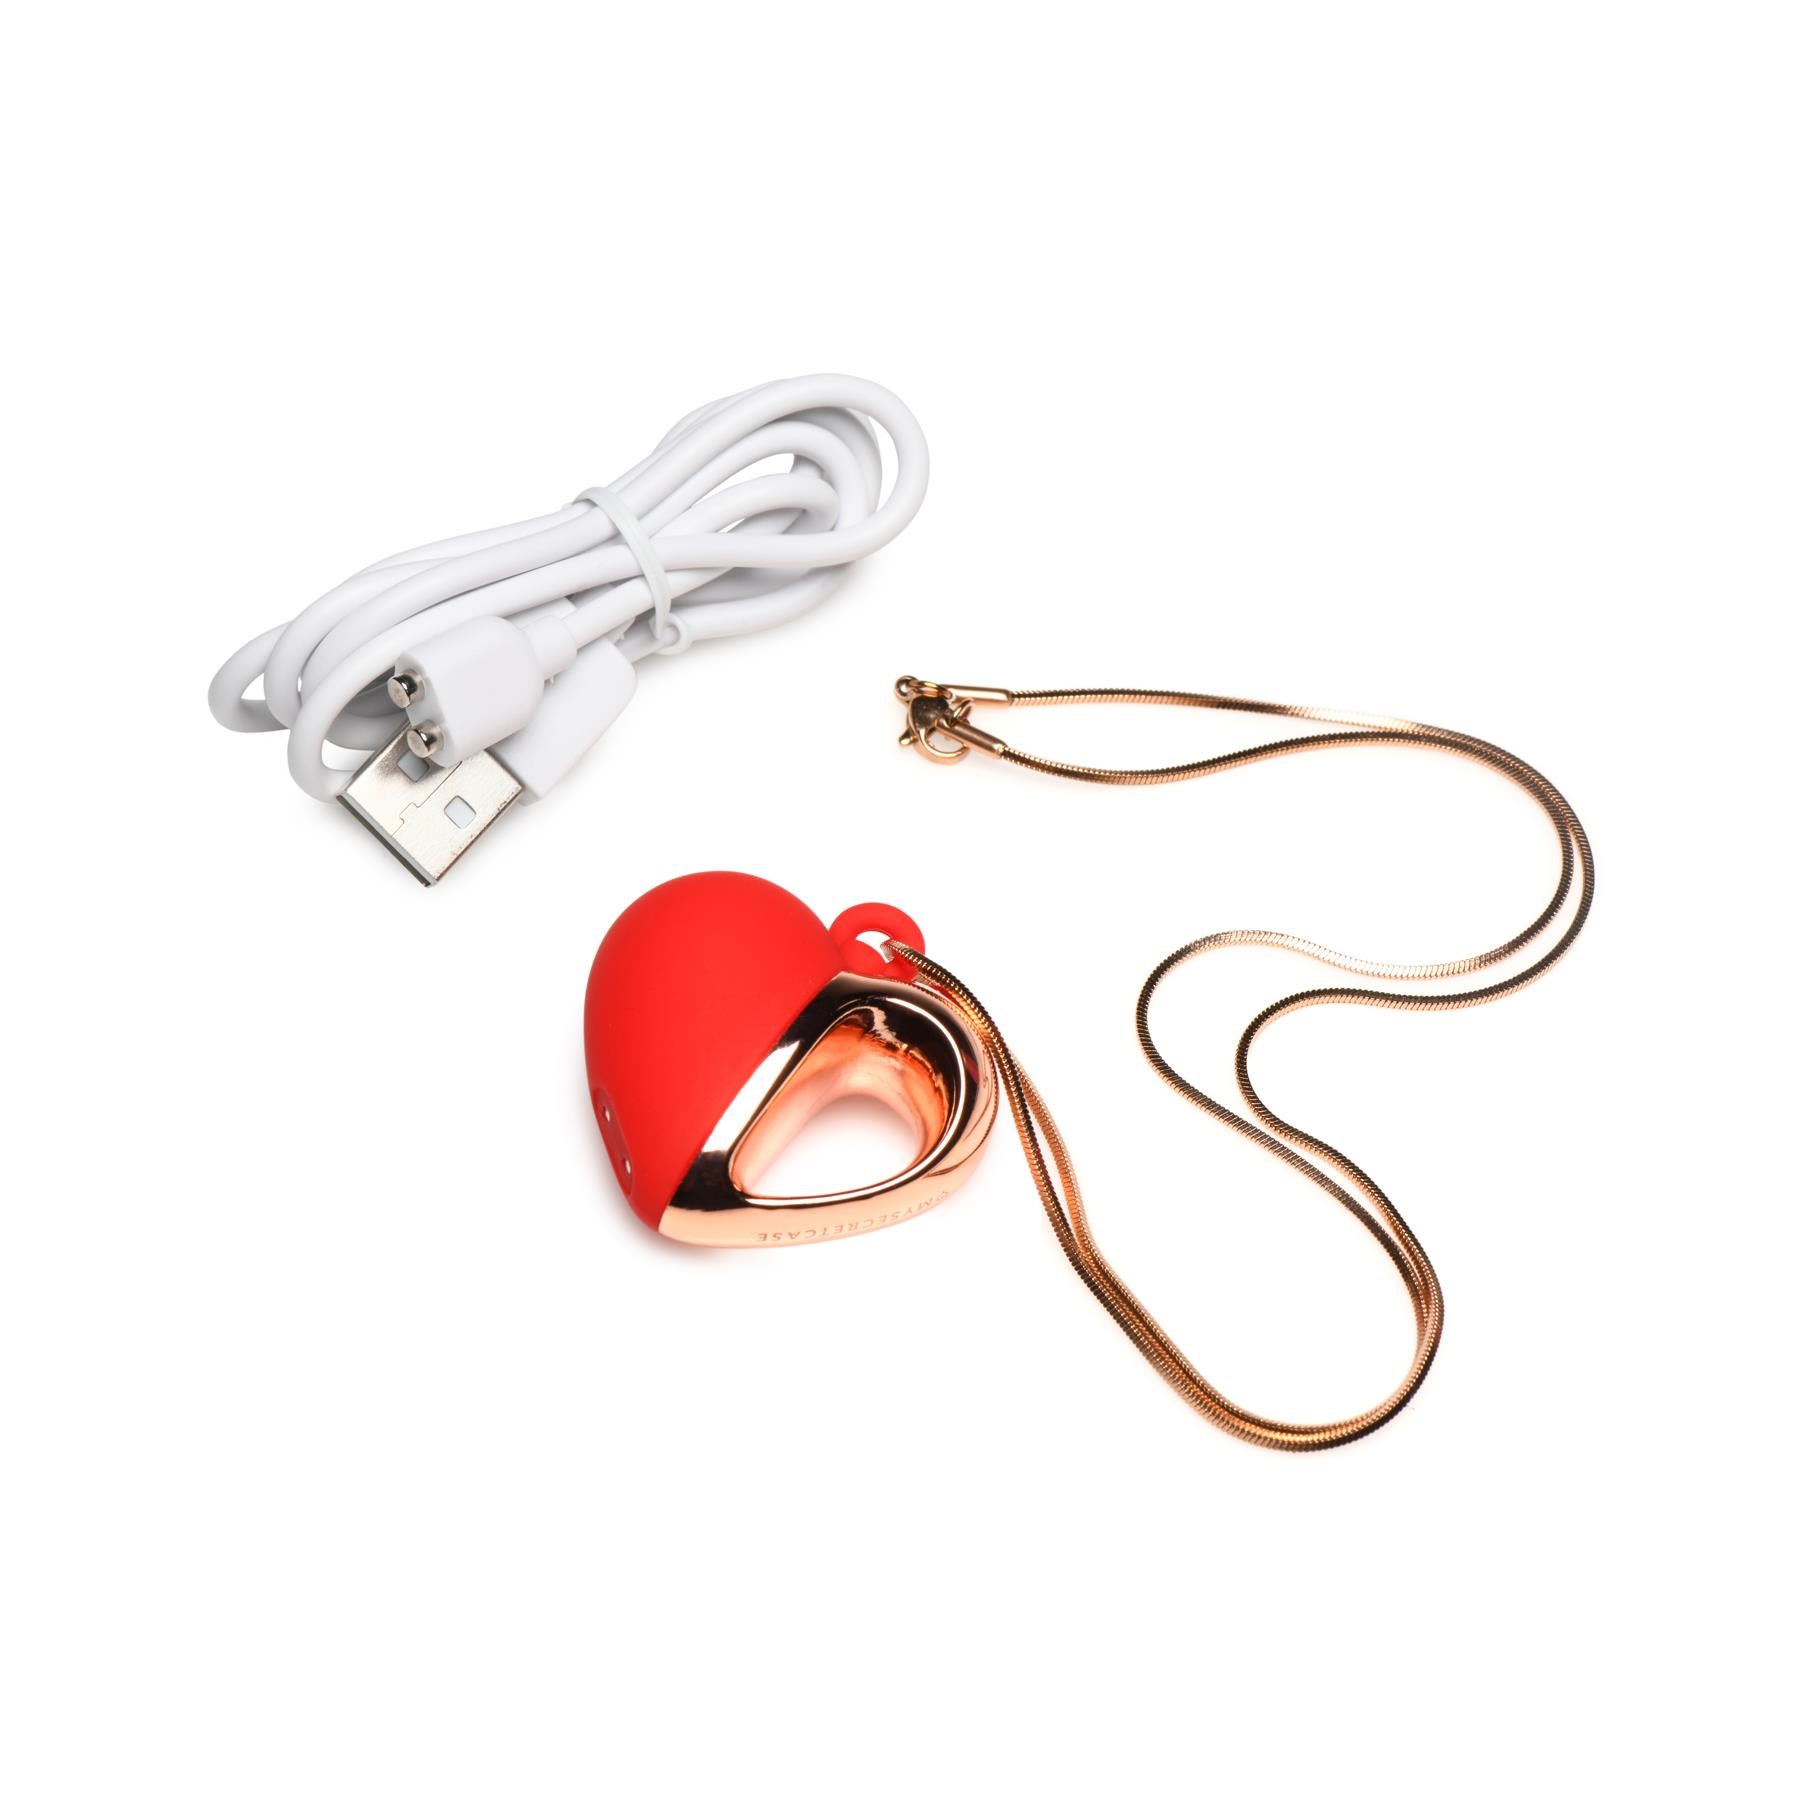 Charmed Silicone Heart Necklace - Product Shot - With Charging Cable